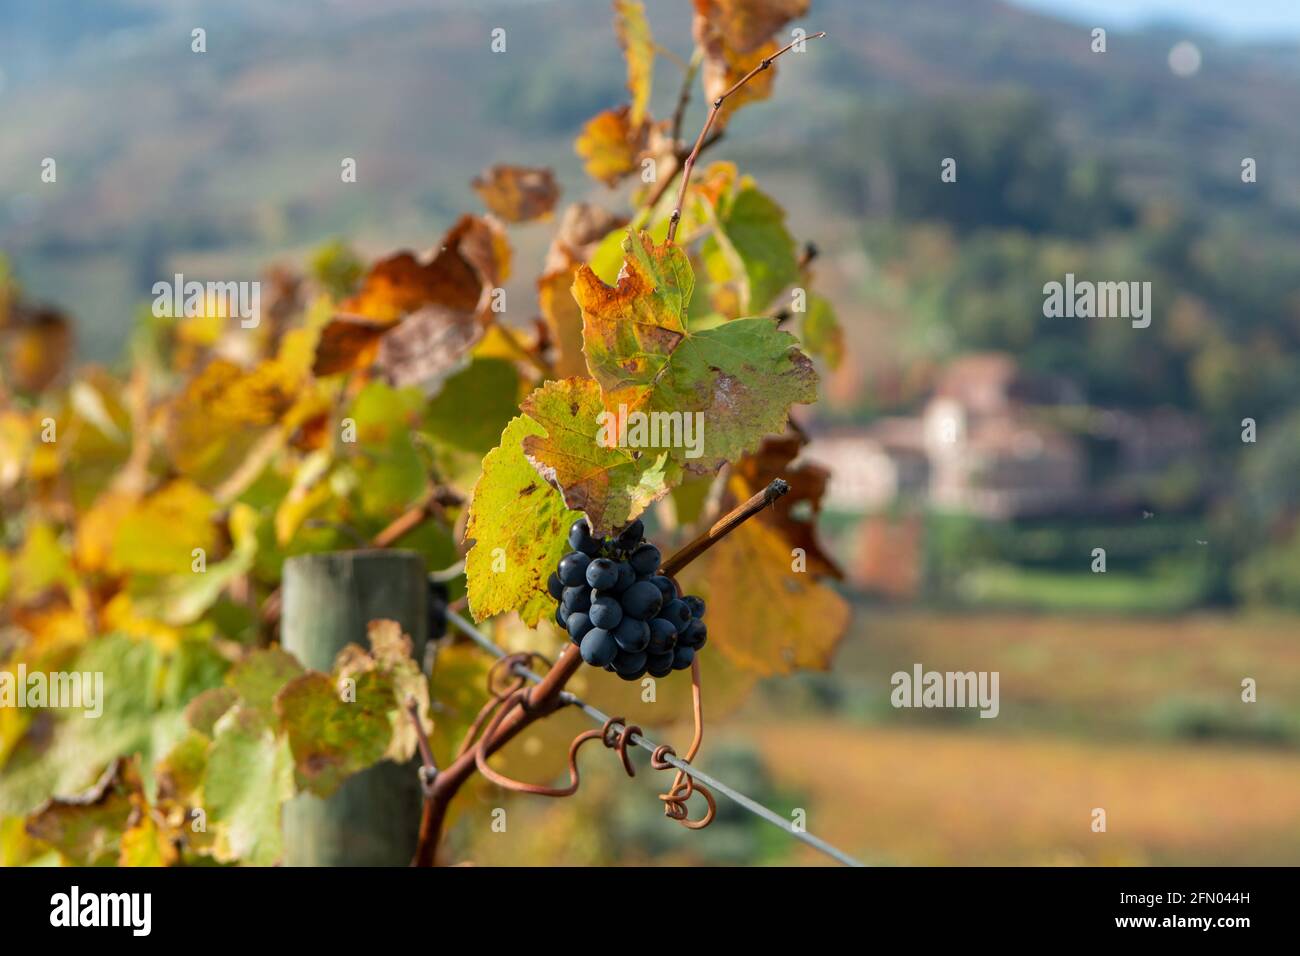 Ripe black wine grapes growing on vineyards in Douro Valley, Portugal close up Stock Photo